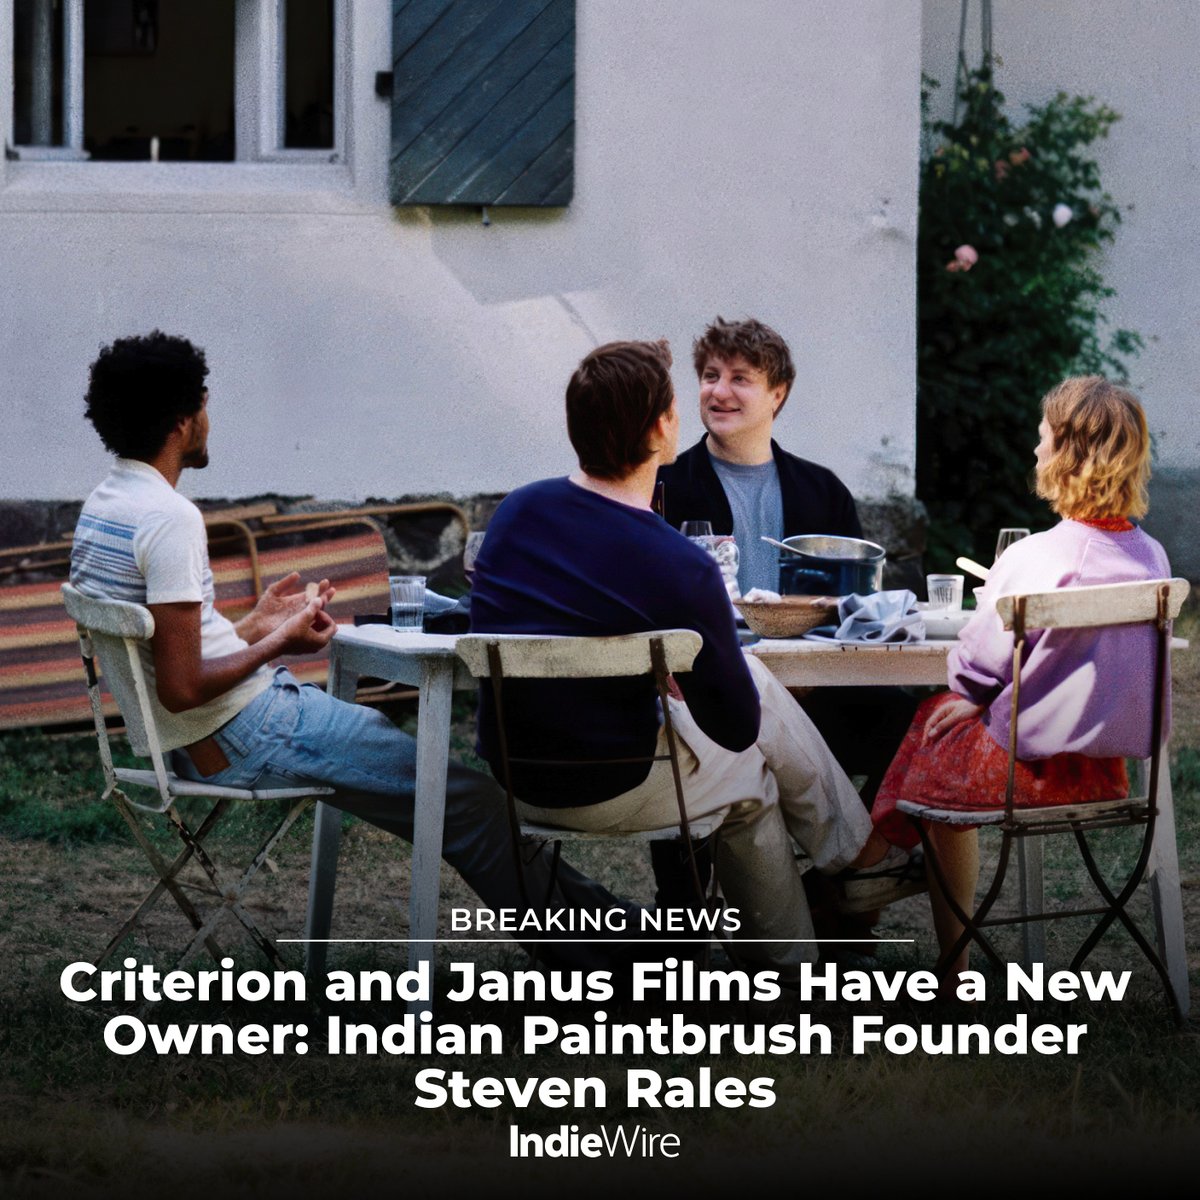 Criterion and its sister distribution arm Janus Films each have a new owner: Indian Paintbrush founder Steven Rales. More details: trib.al/2uZUrwg